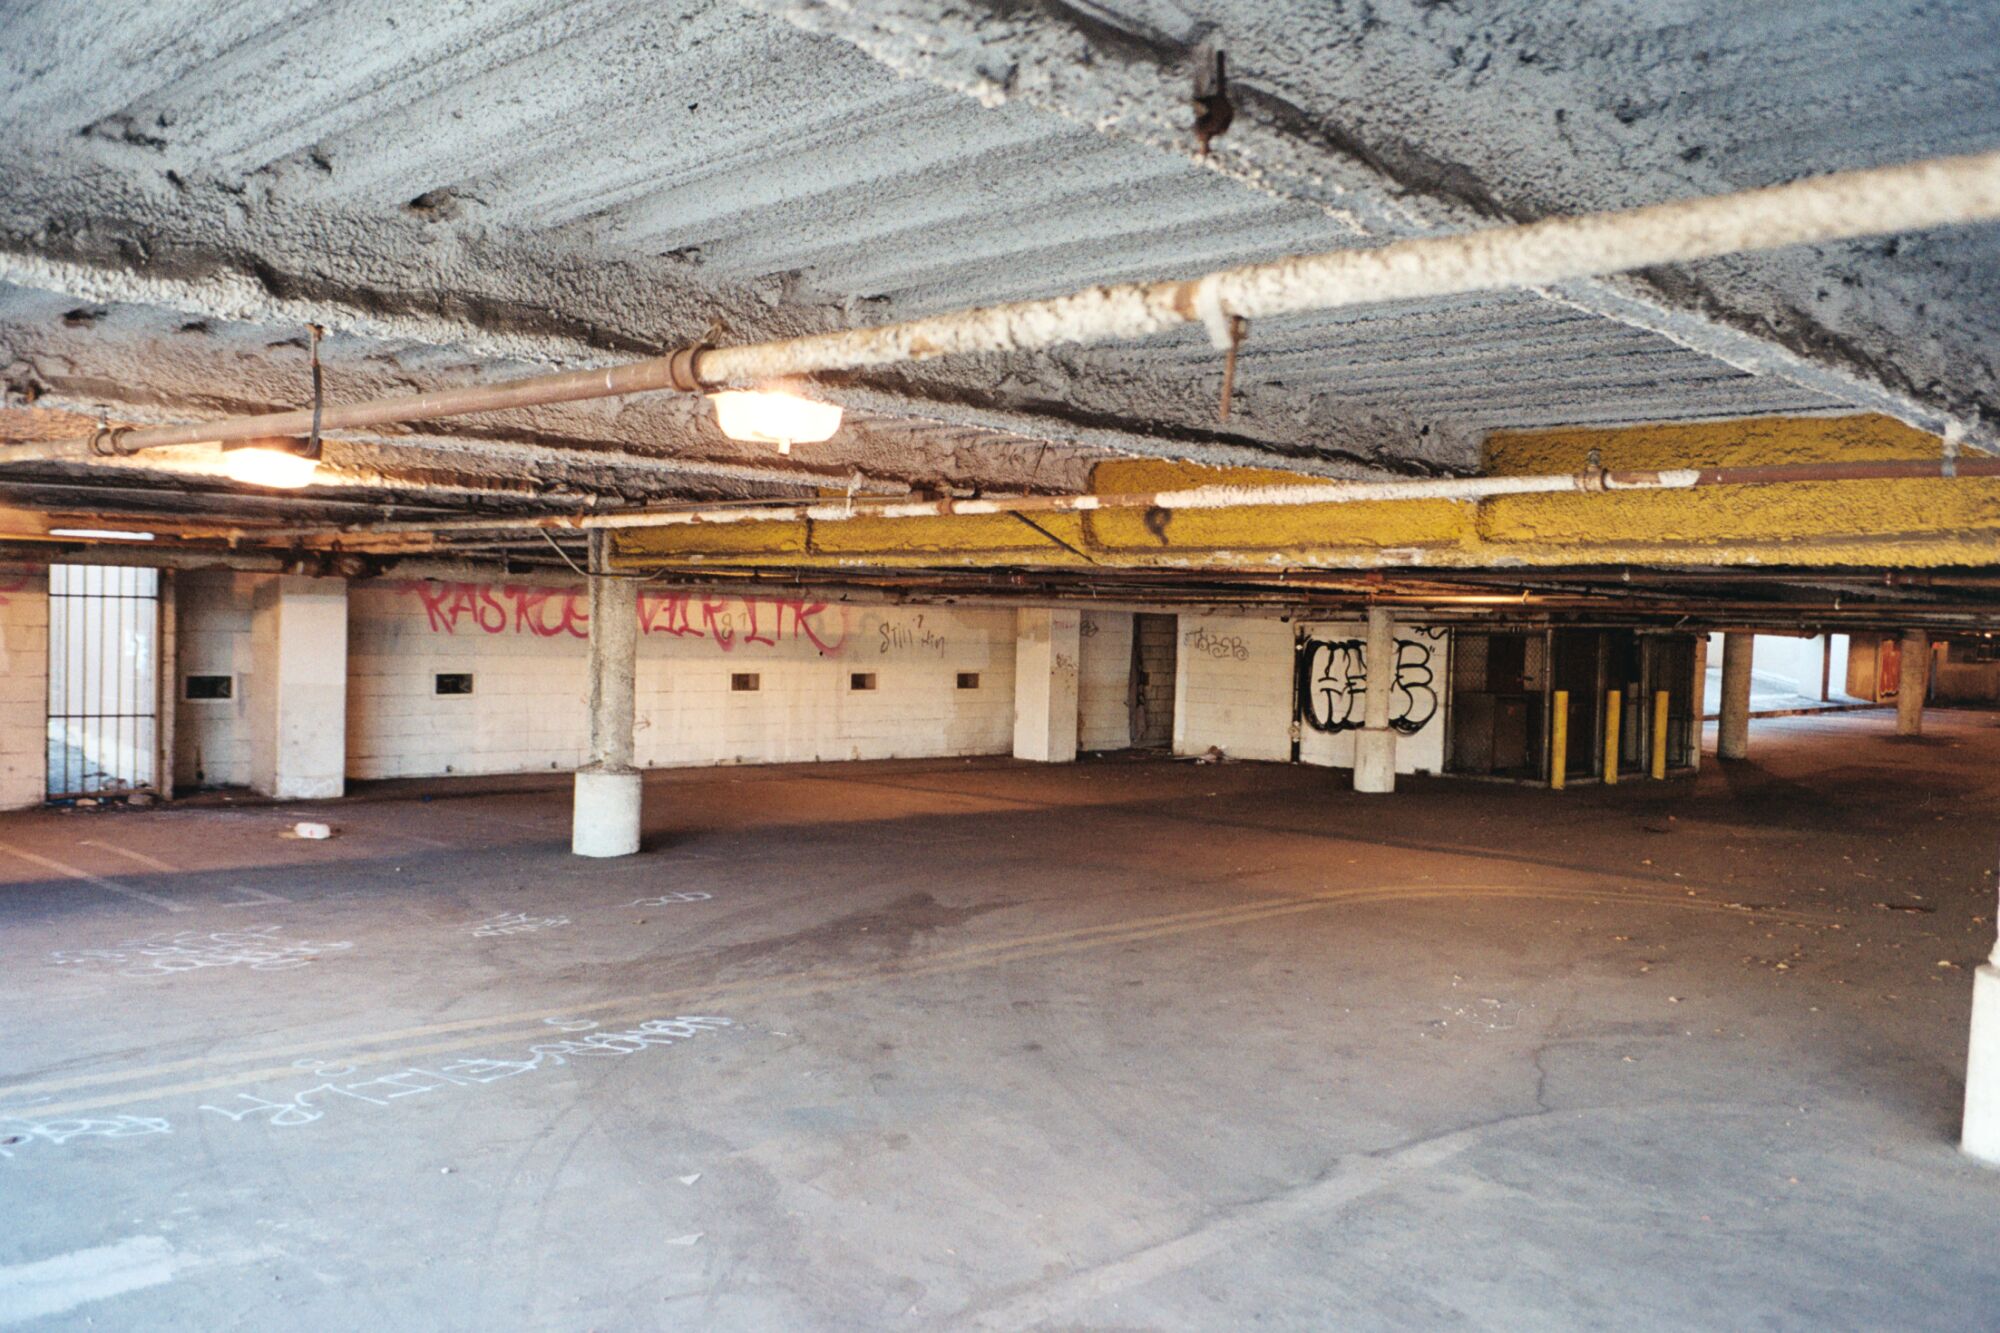 The interior of an empty garage with graffiti on the walls